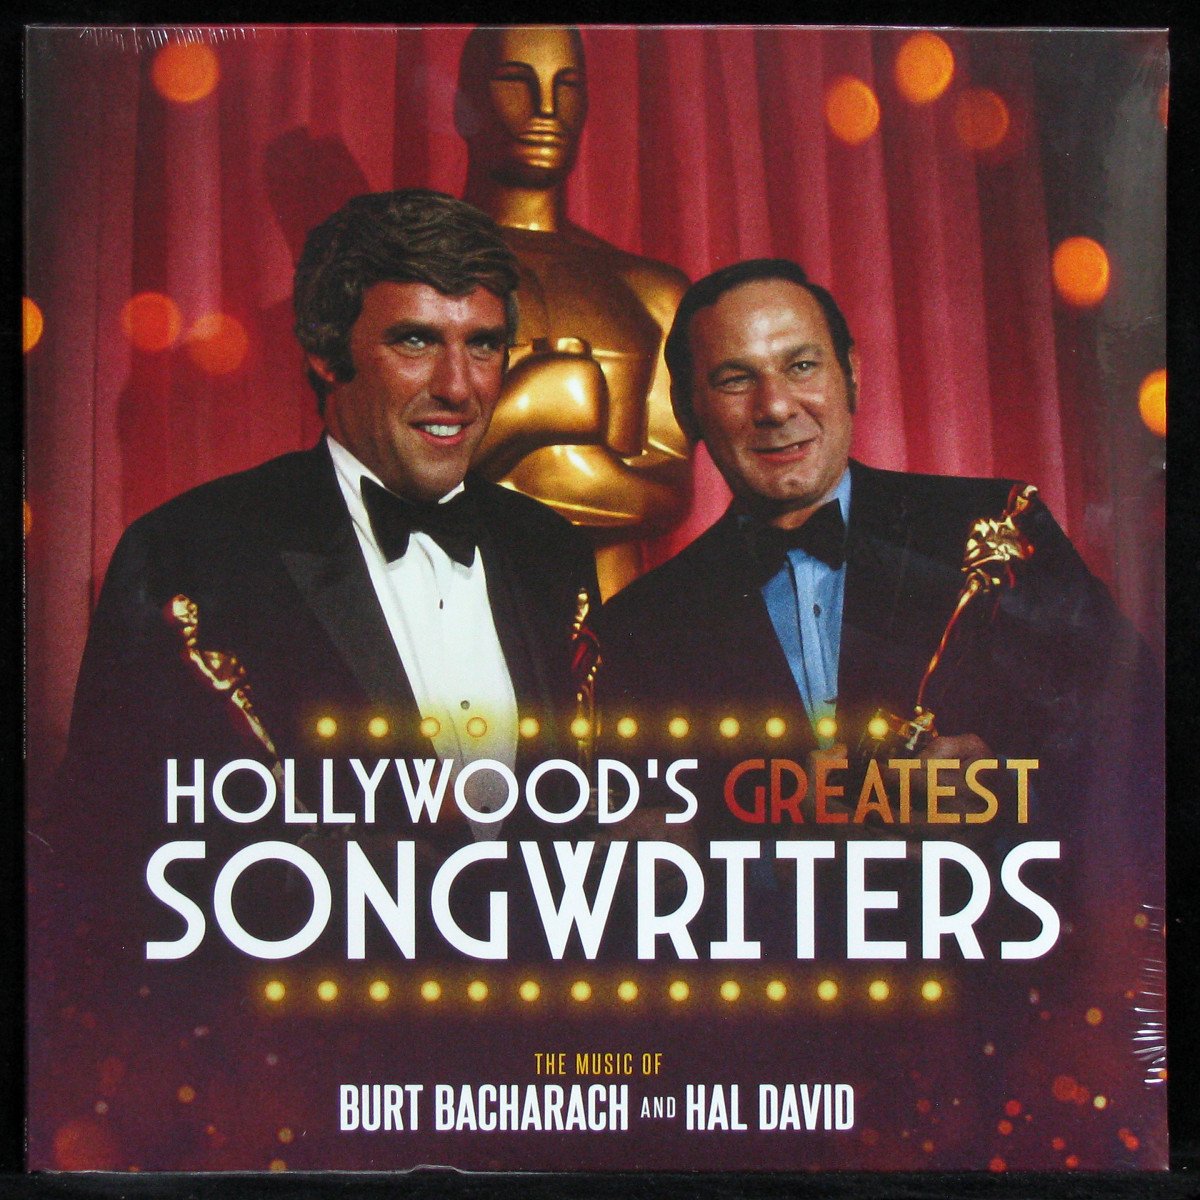 Hollywood’s Greatest Songwriters